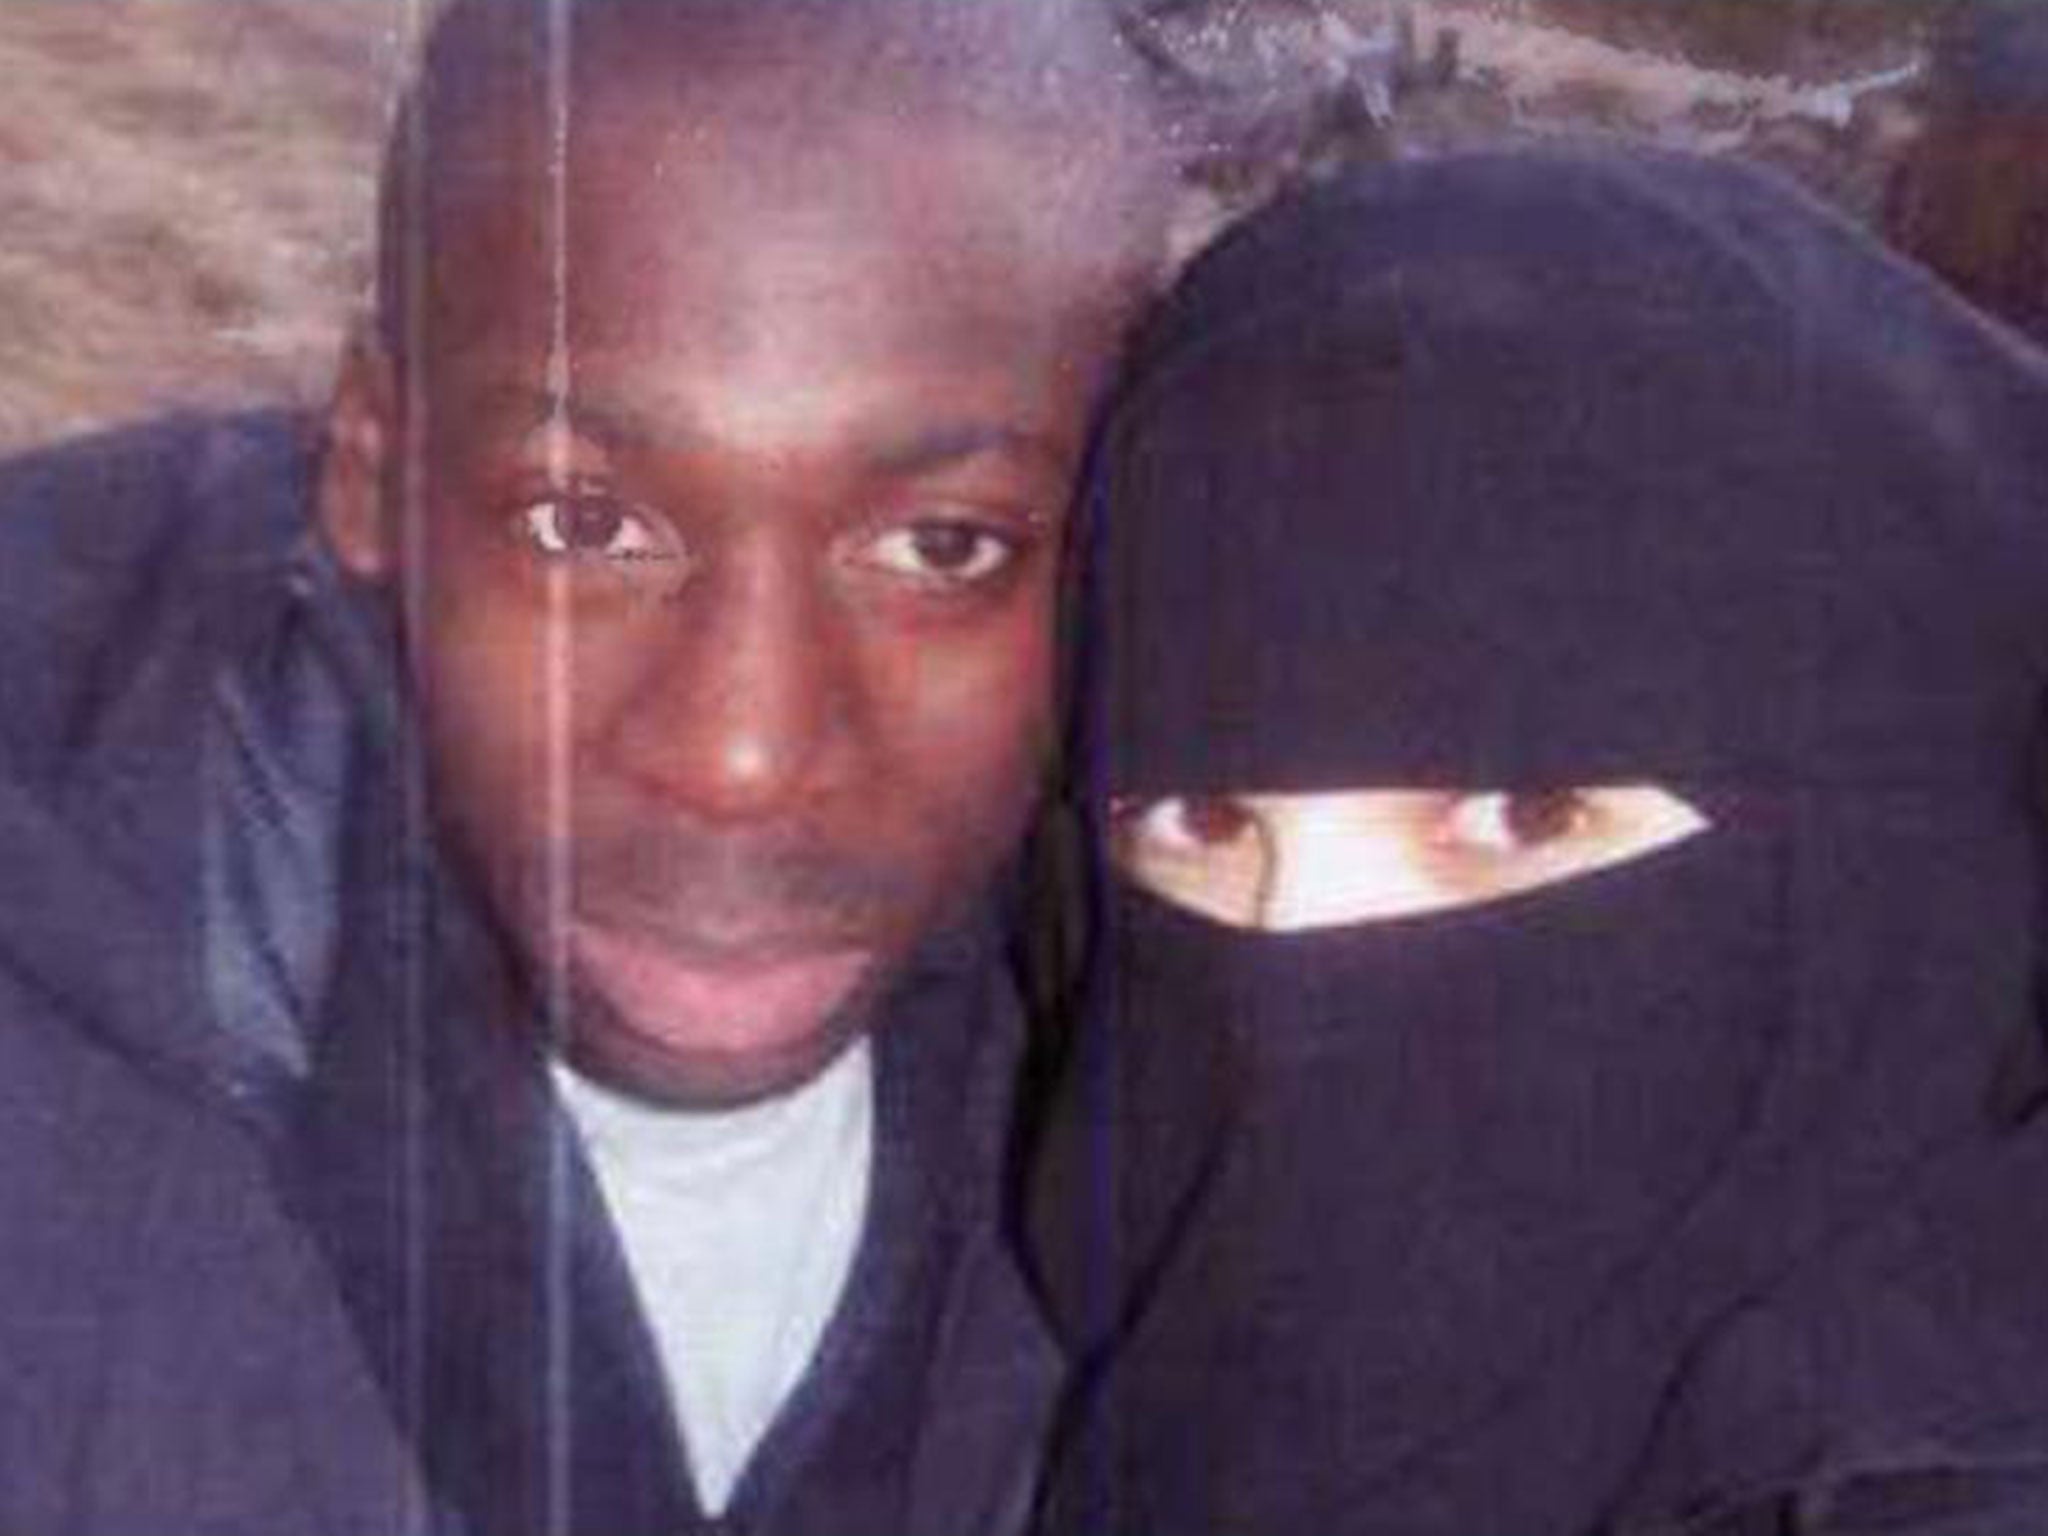 Hayat Boumeddiene with Amedy Coulibaly in Cantal, France, in 2010.She claimed they had crossbow training